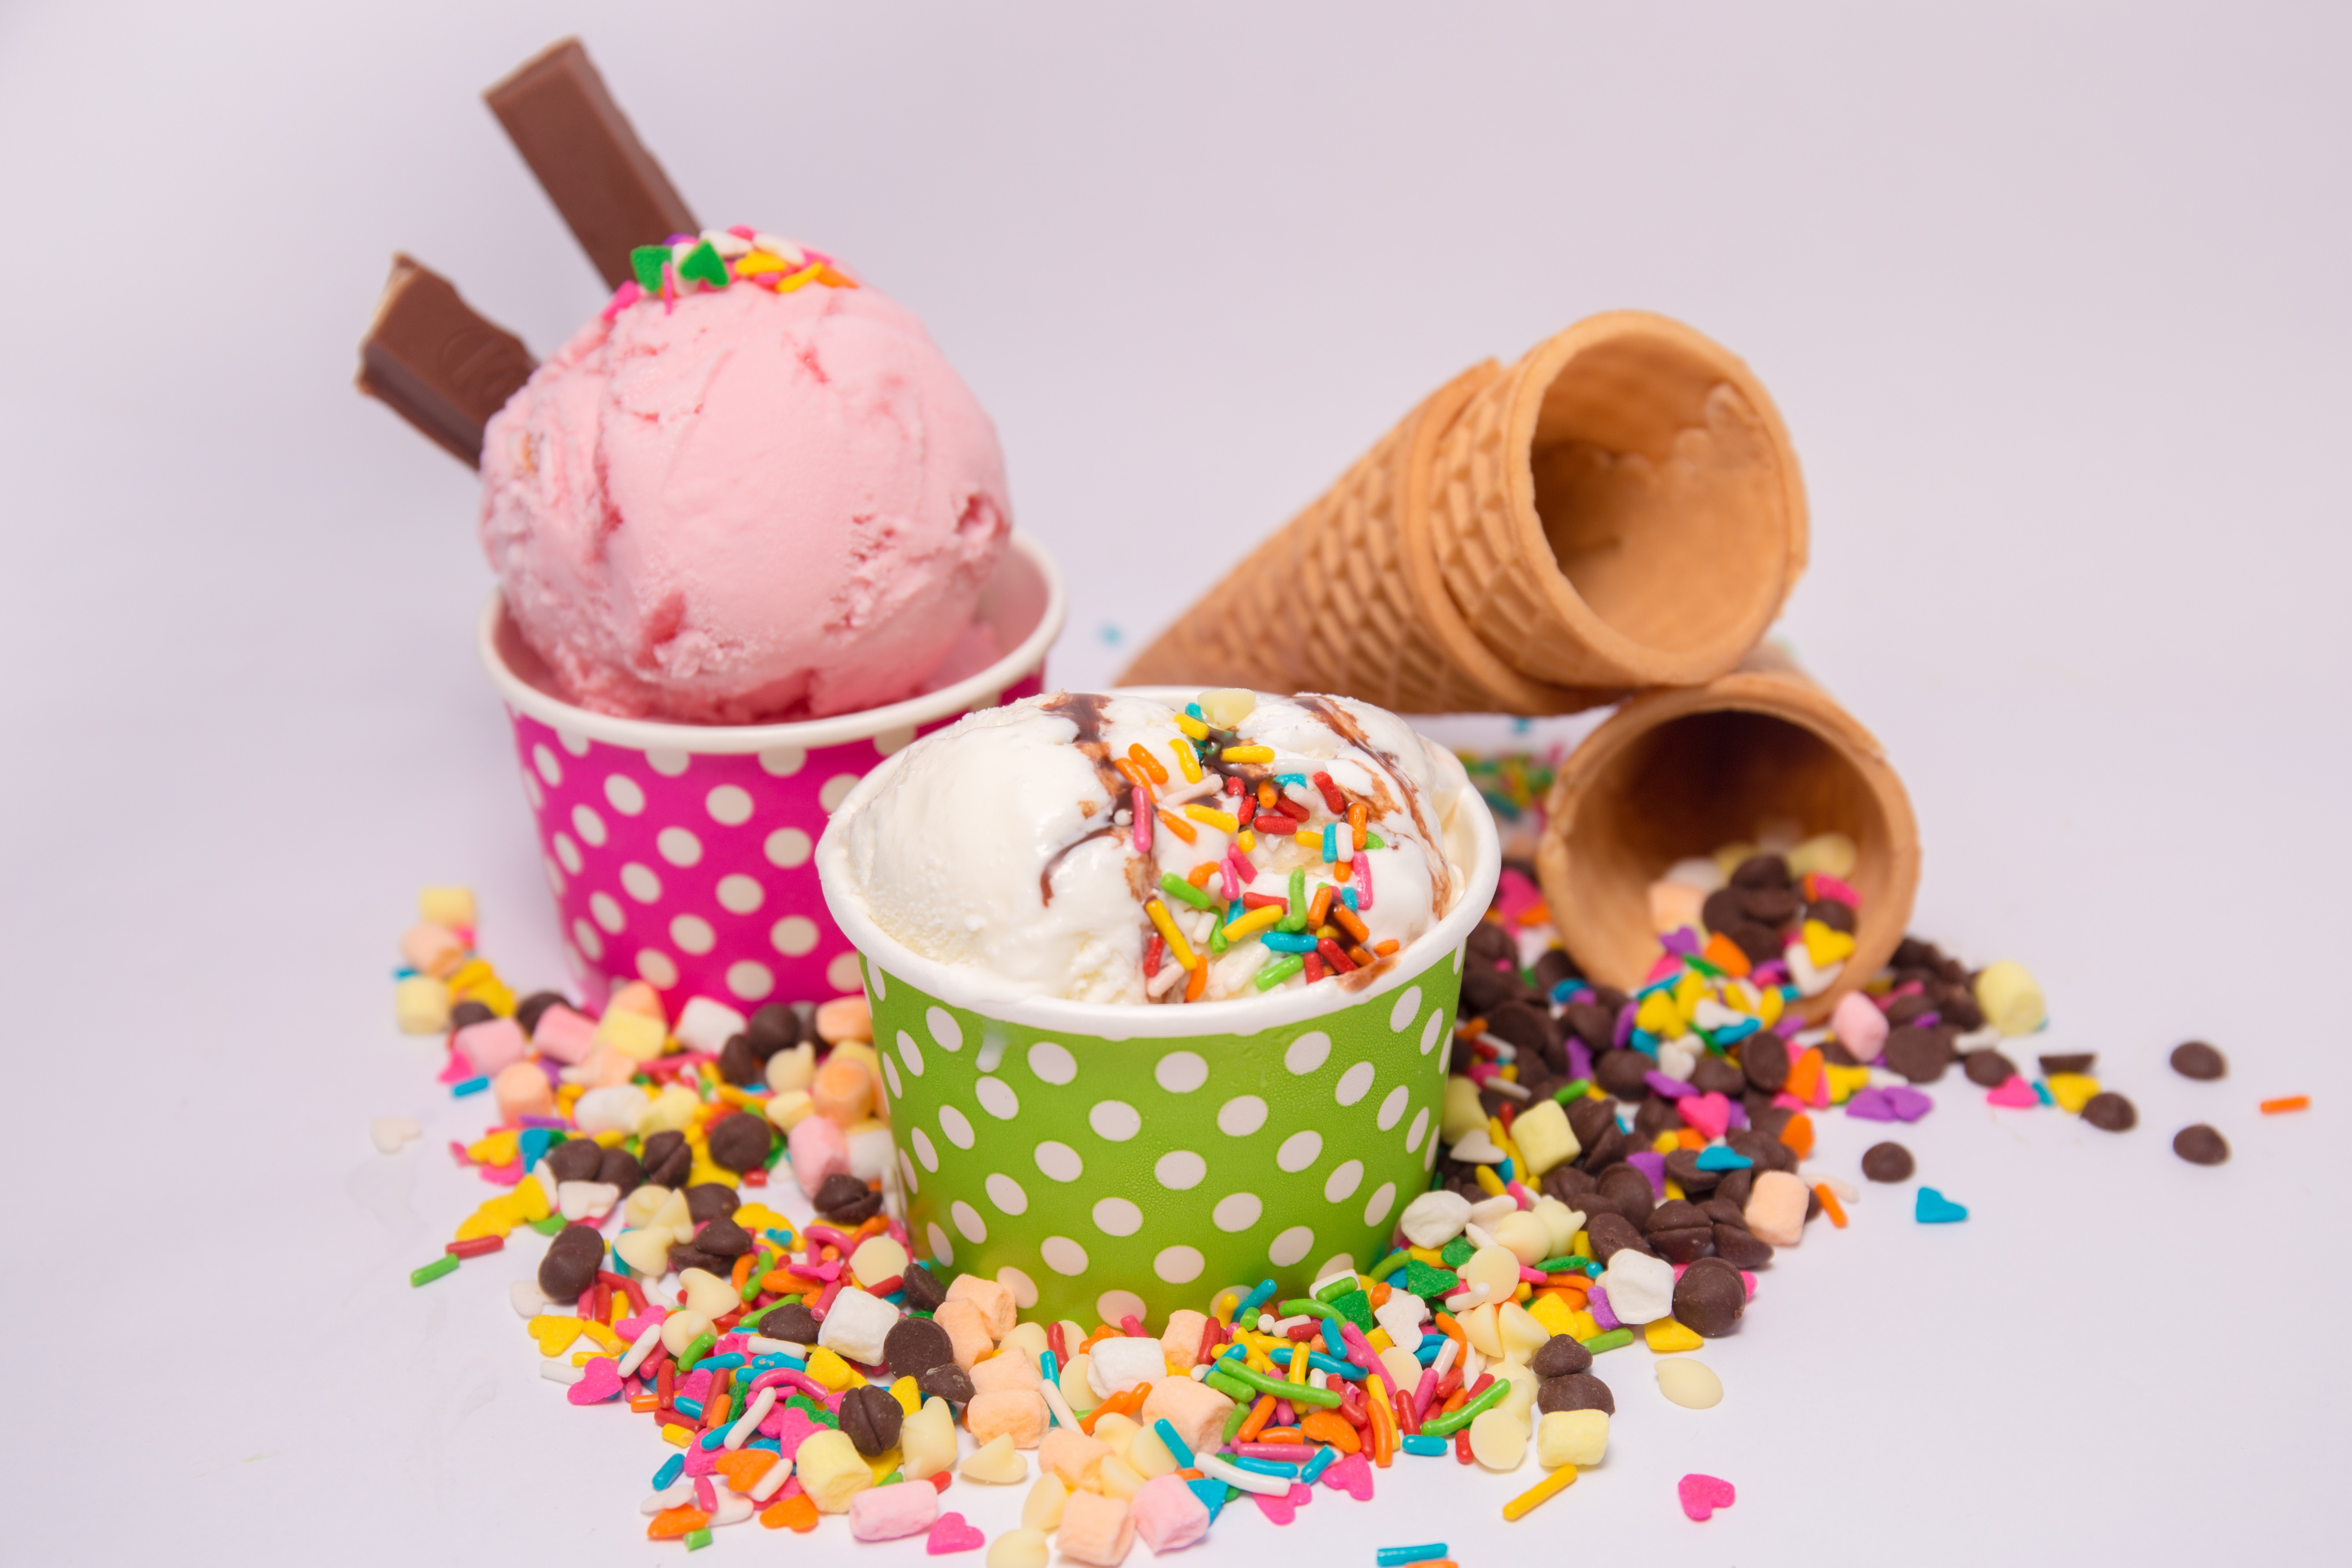 Baskin Robbins in Junction City For Sale